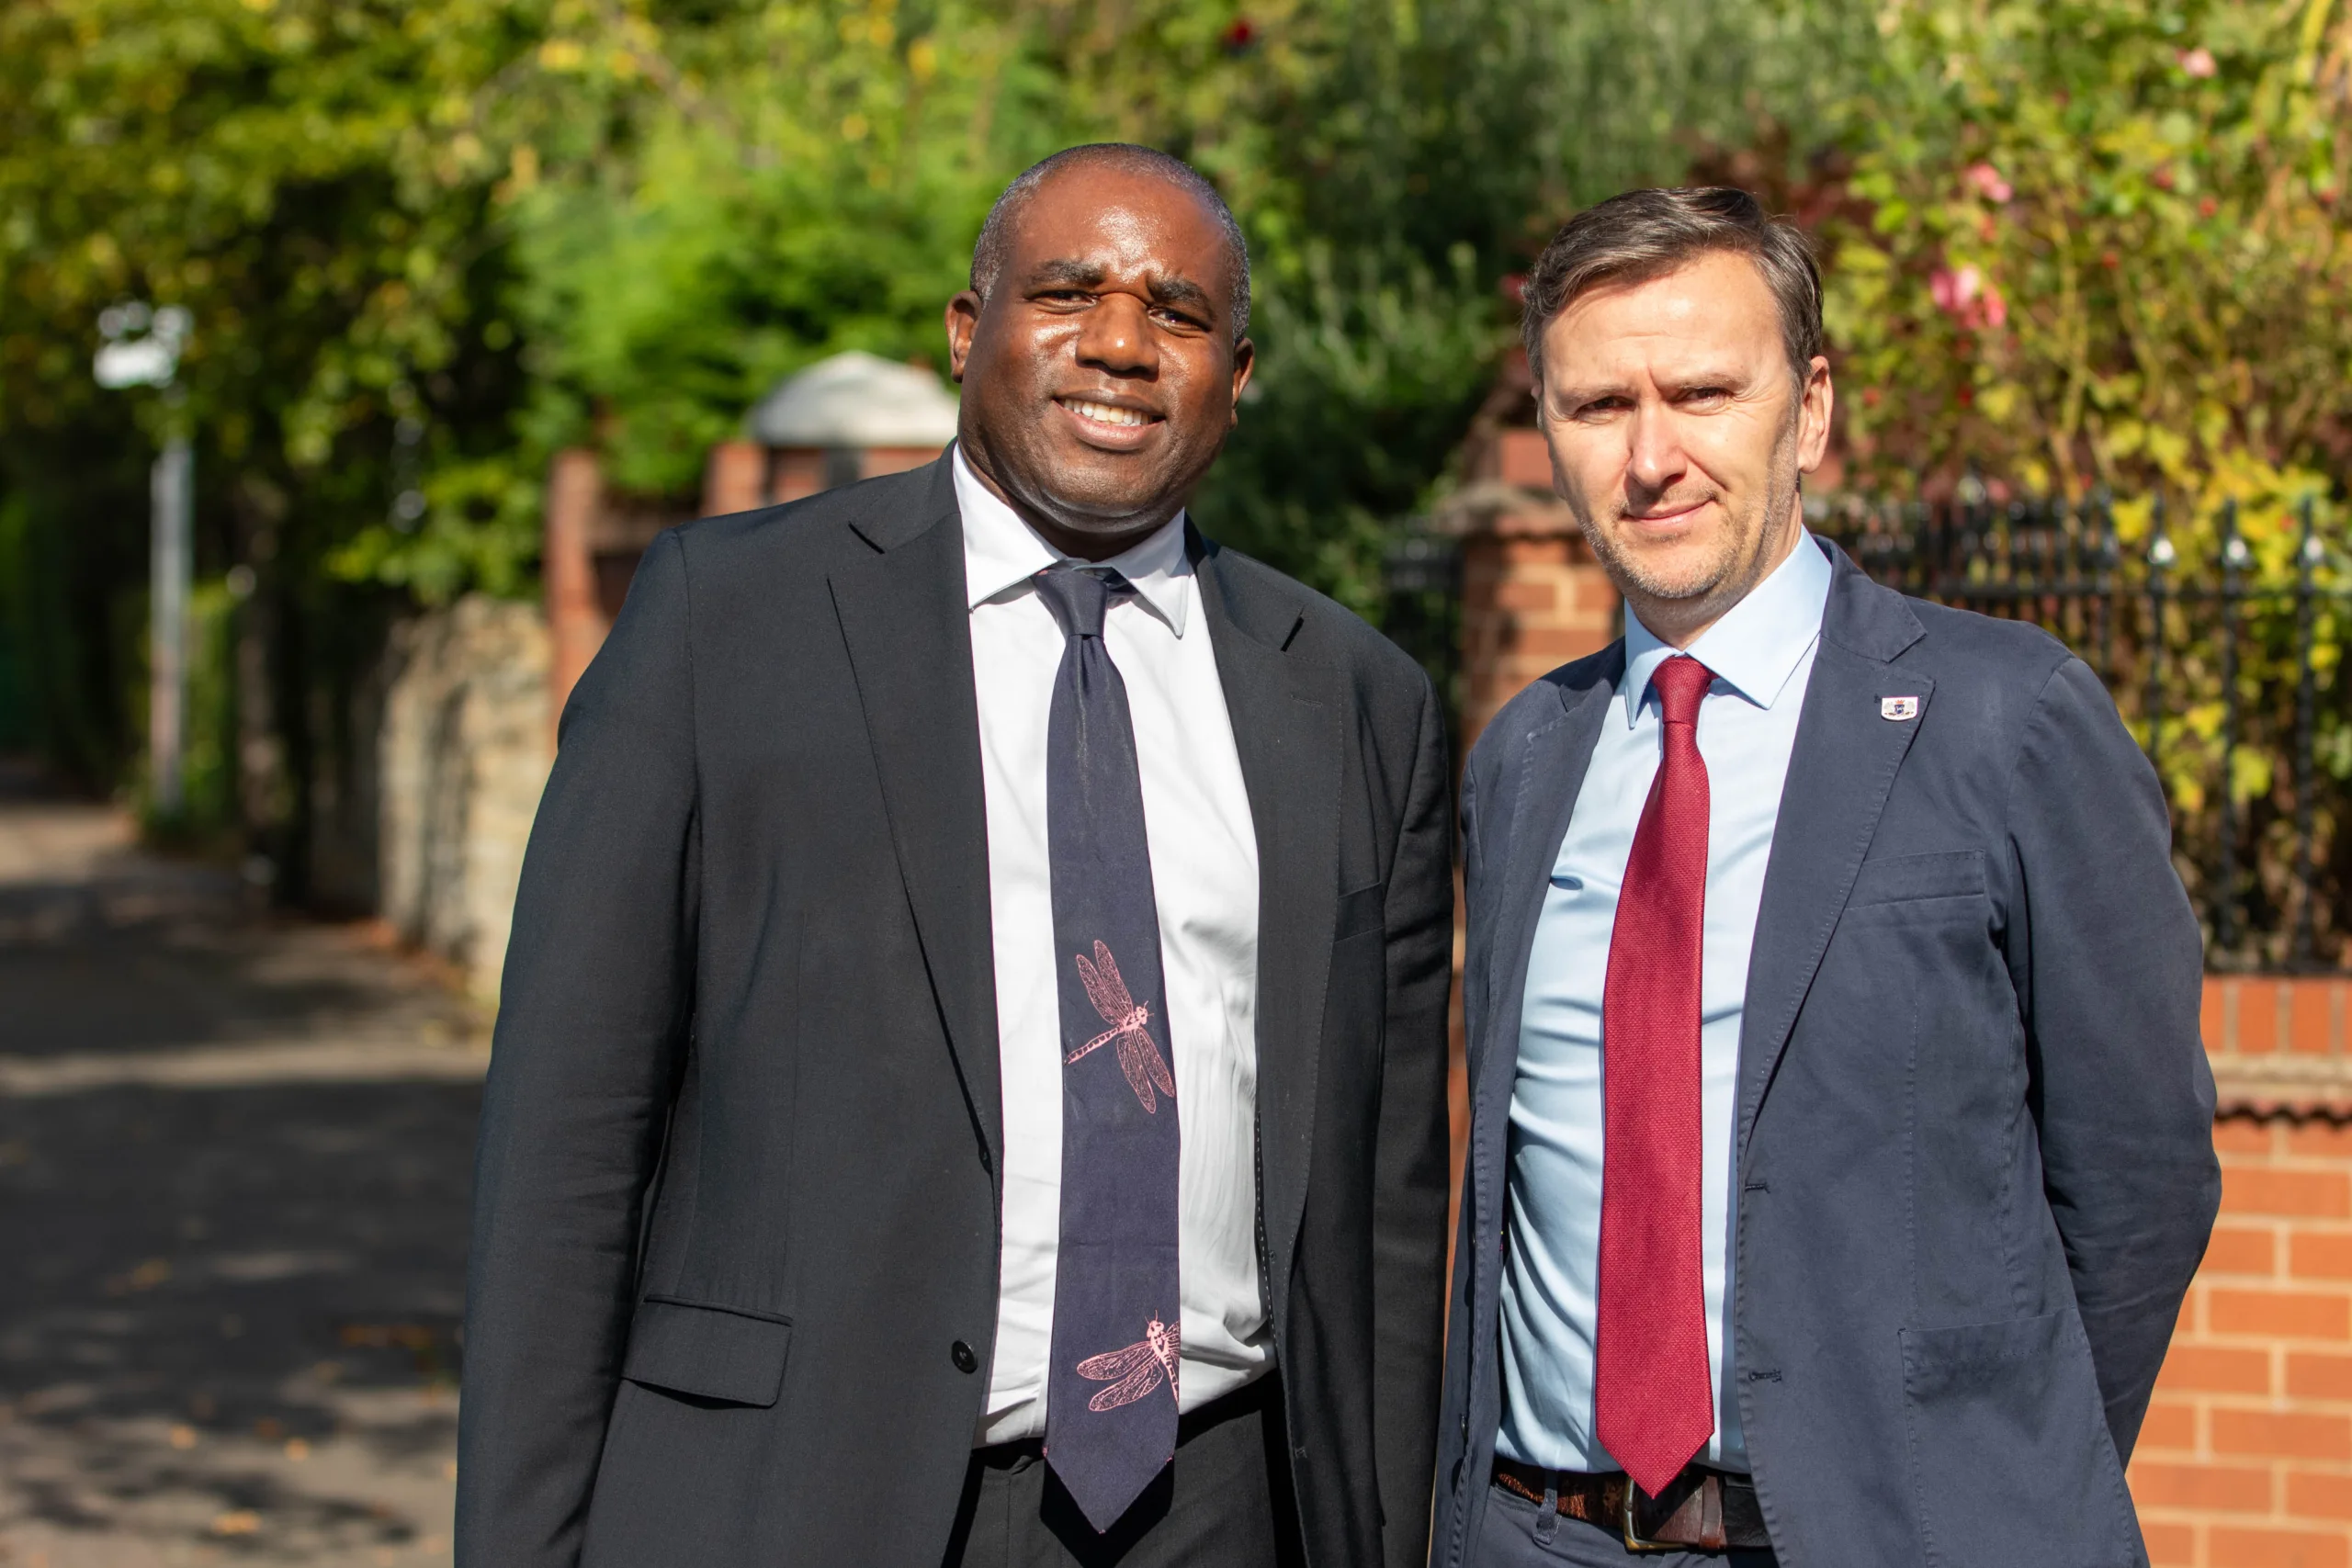 David Lammy, Shadow Foreign Secretary, and Peterborough prospective Parliamentary candidate Andrew Pakes